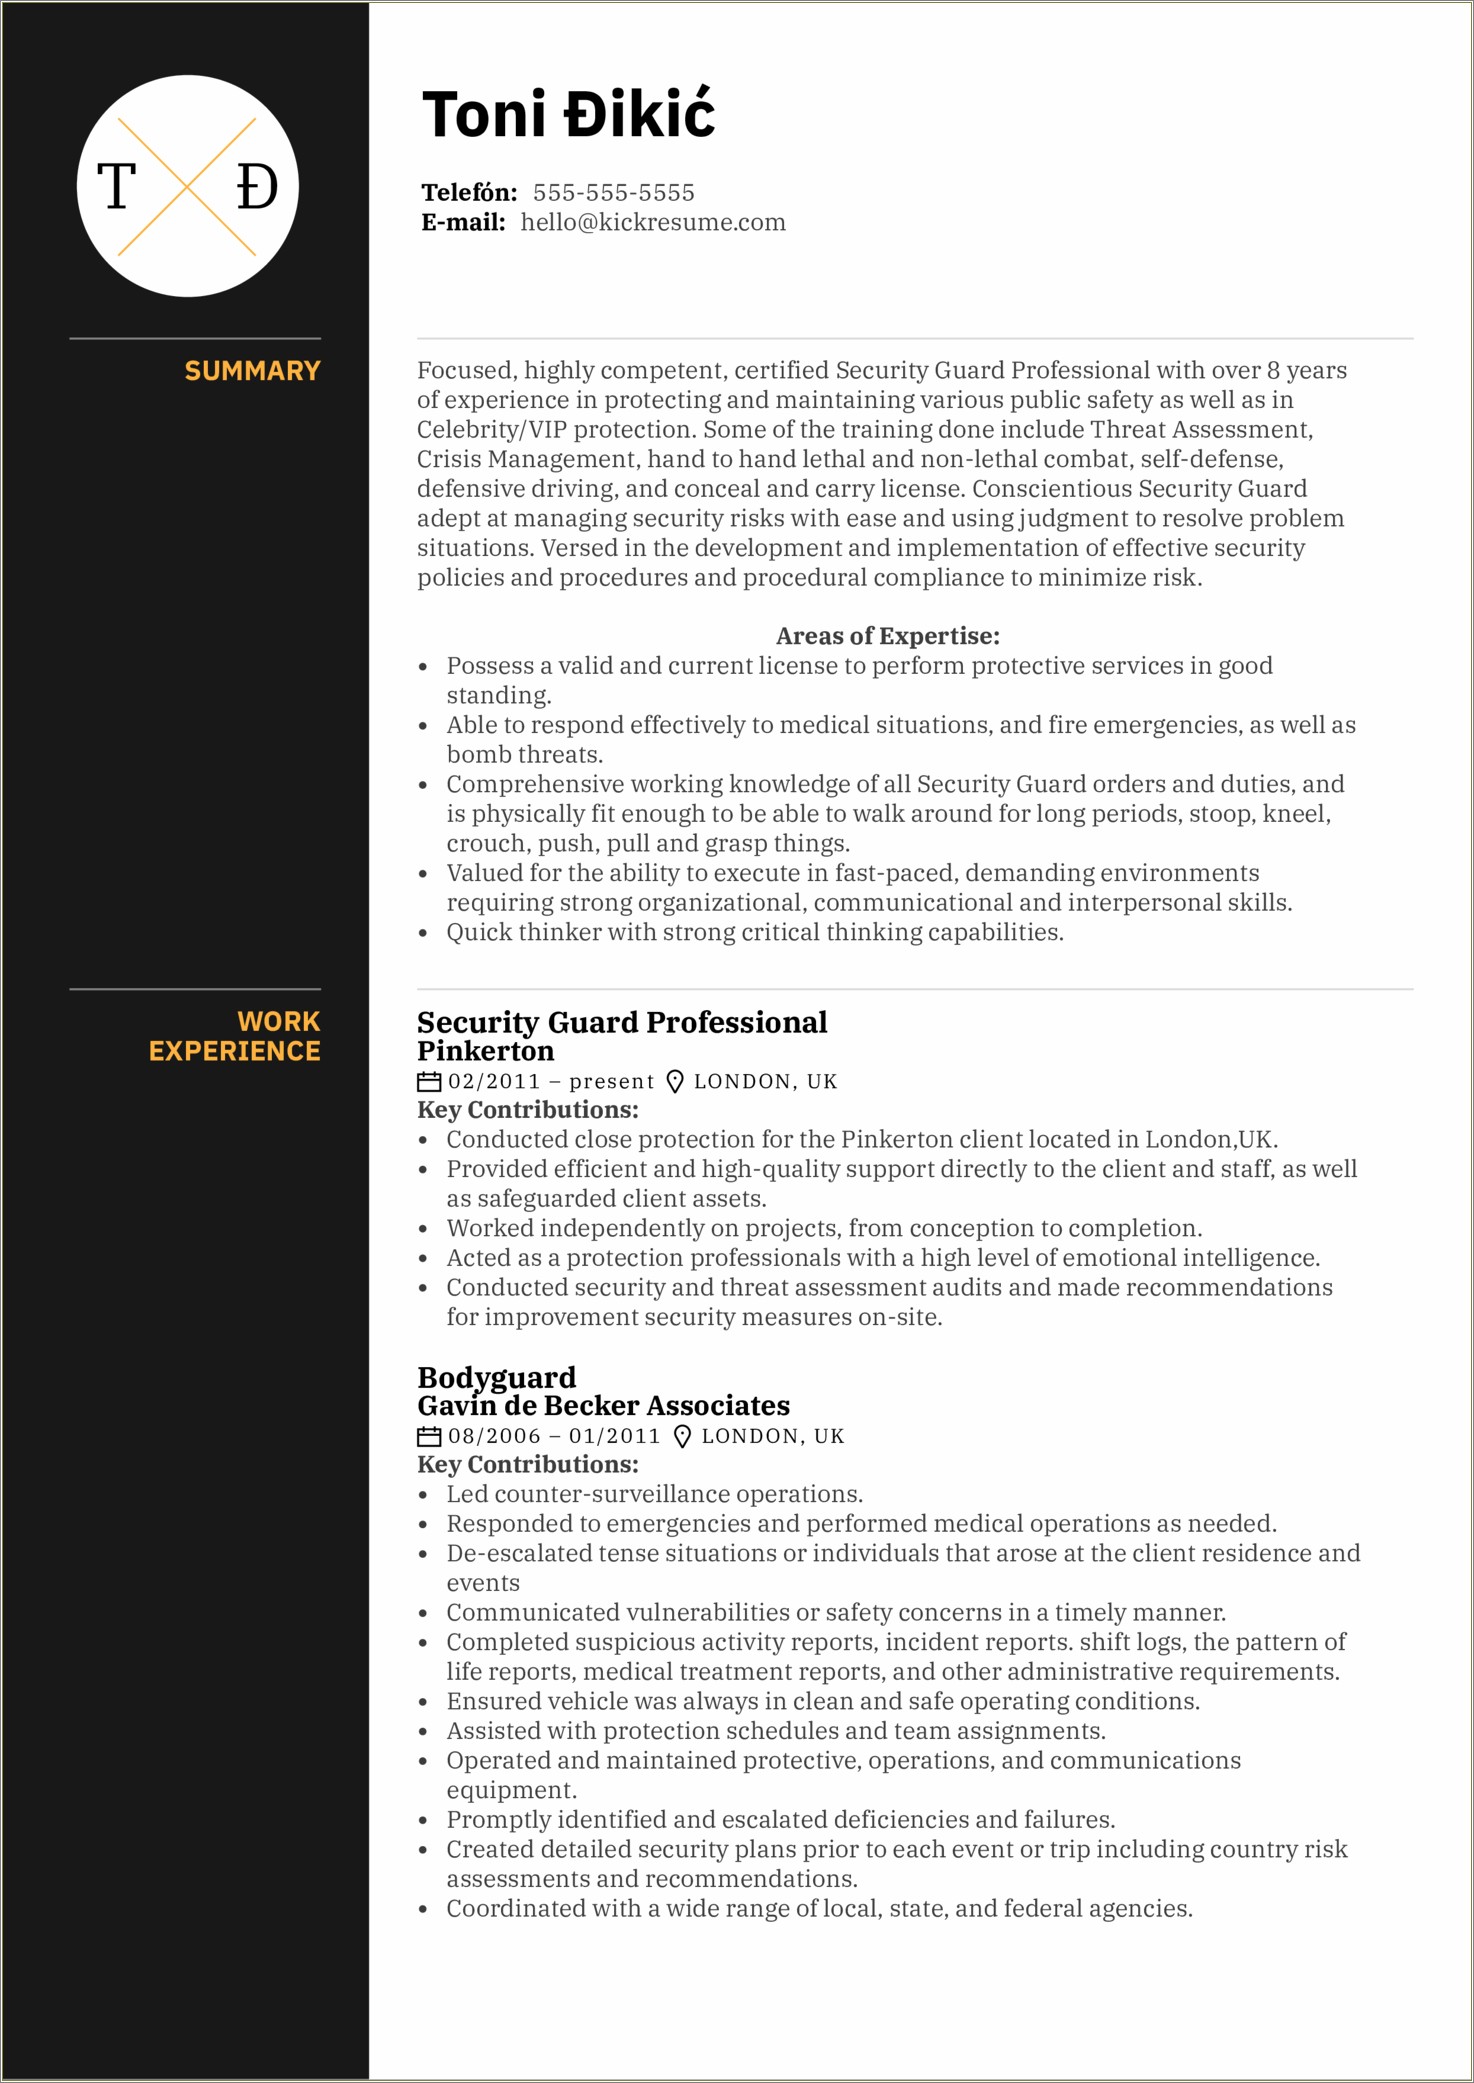 Sample Security Officer Resume Objectives